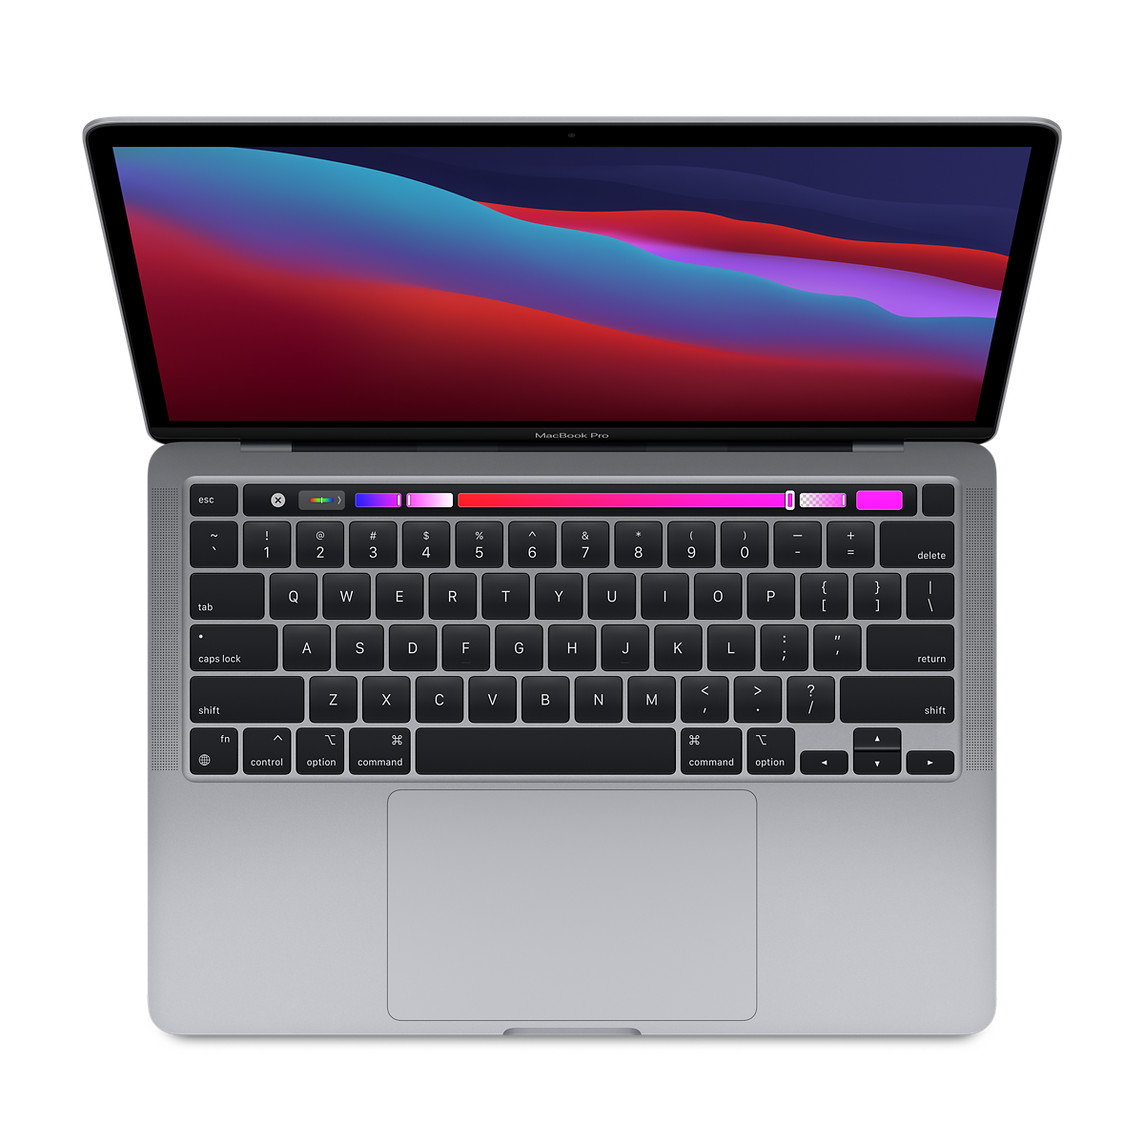 MacBook Pro, open top, display, keyboard with full height function key row and circular Touch ID button, trackpad, Space Gray